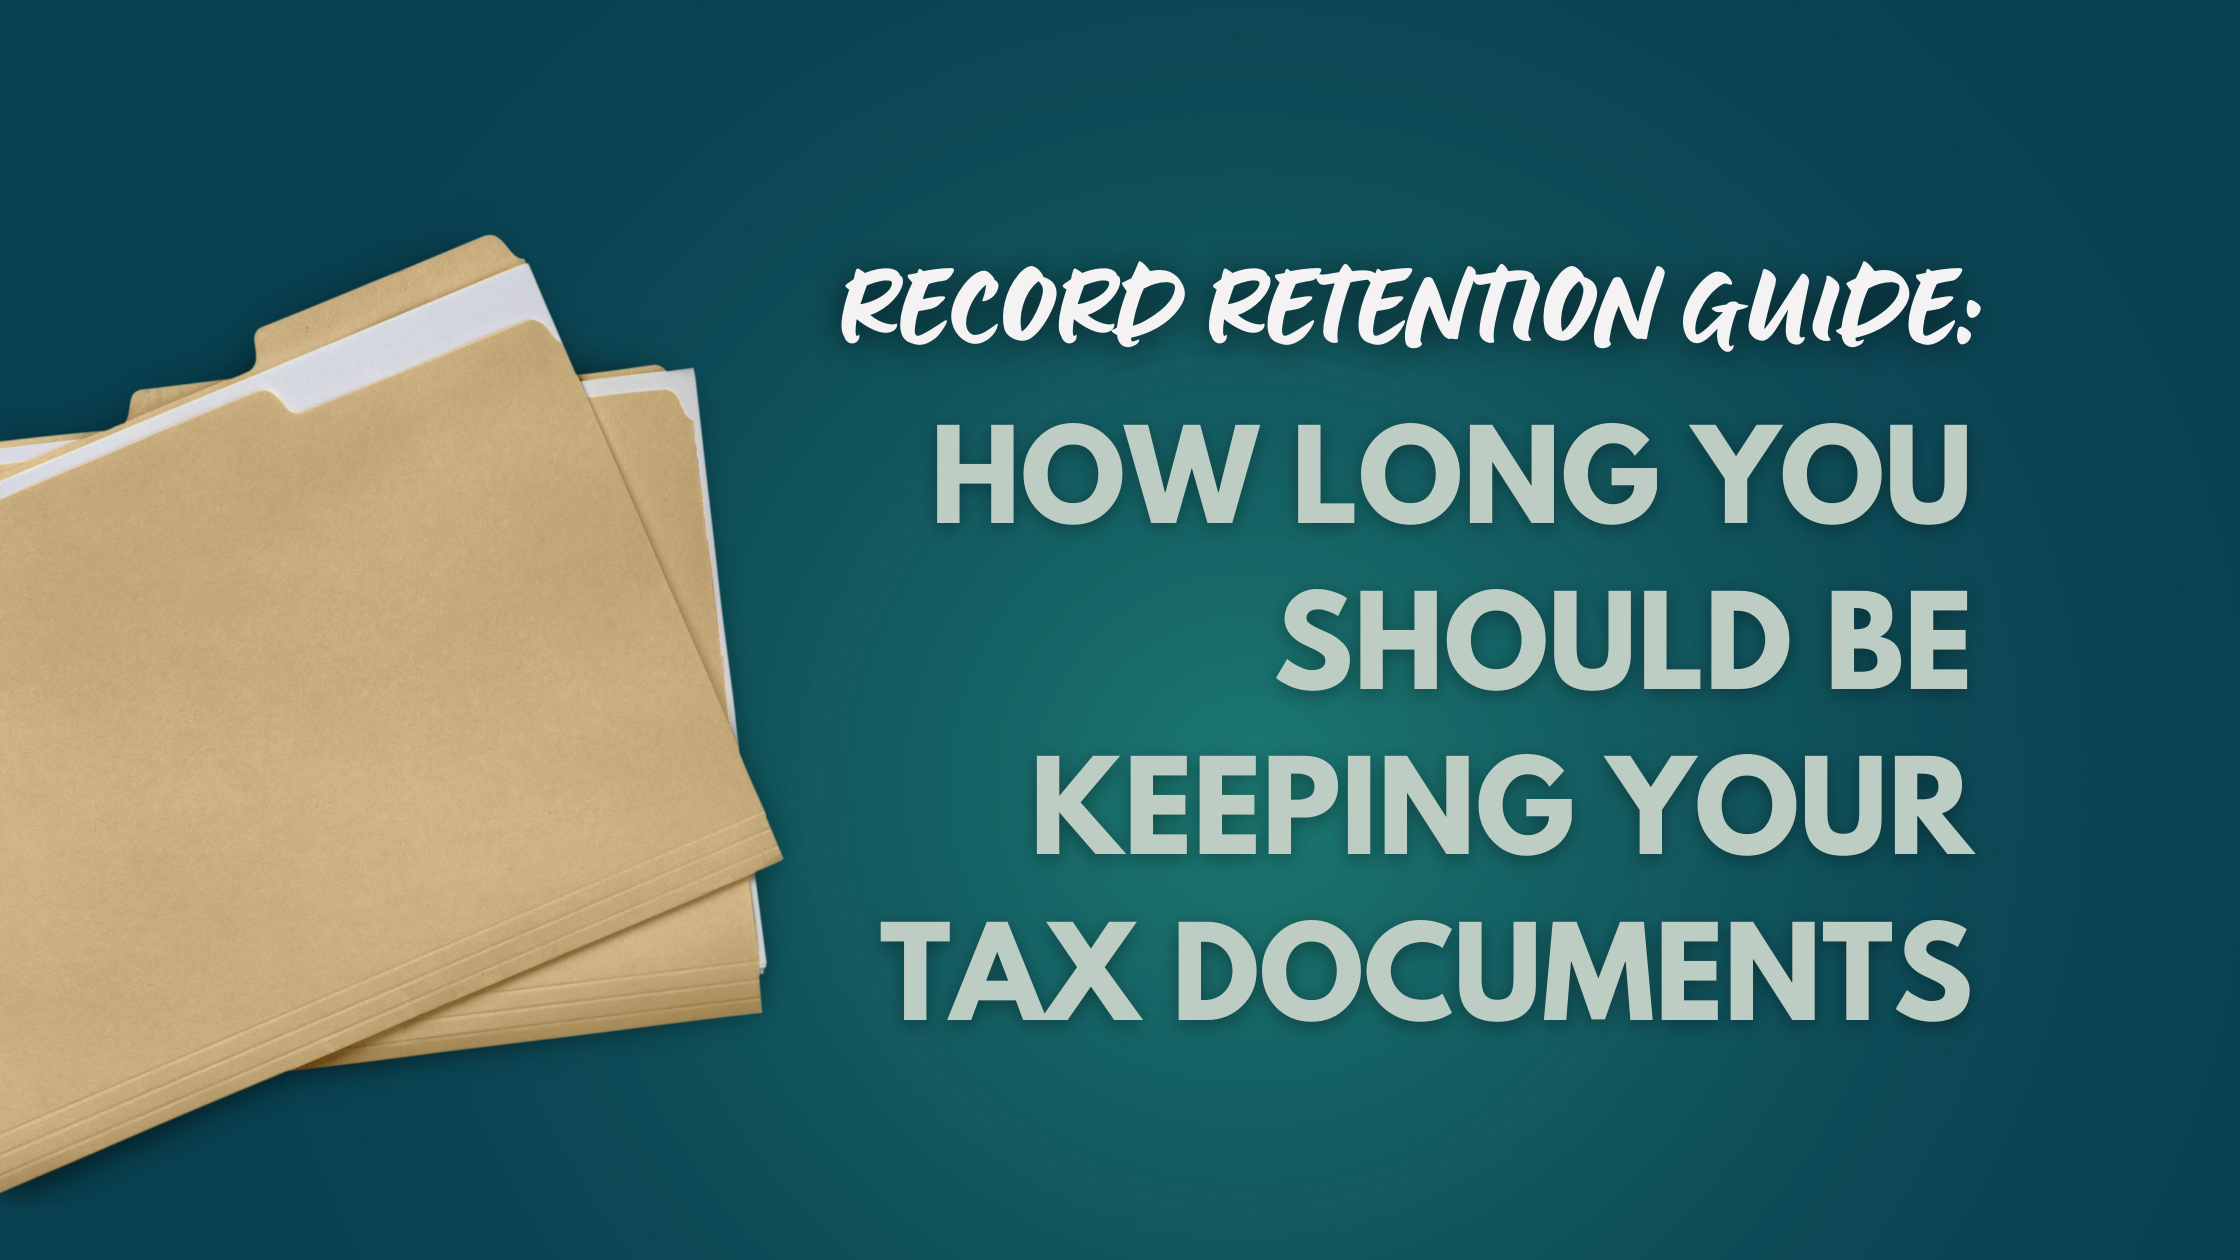 Record Retention Guide: How Long Should You Be Keeping Your Tax Documents